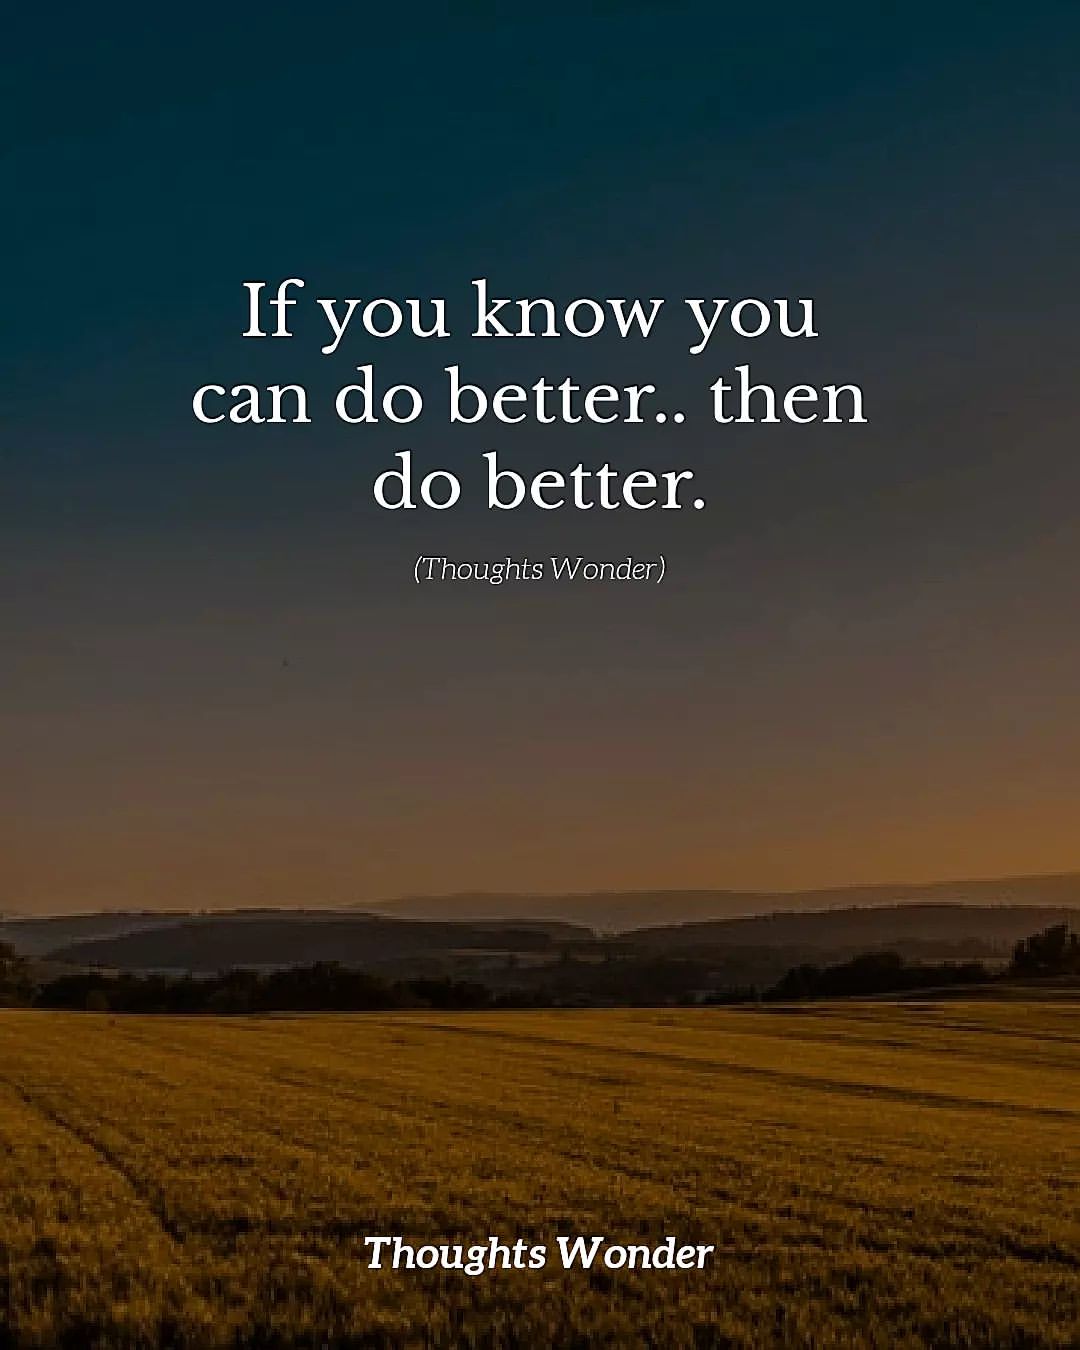 If you know you can do better... then do better.